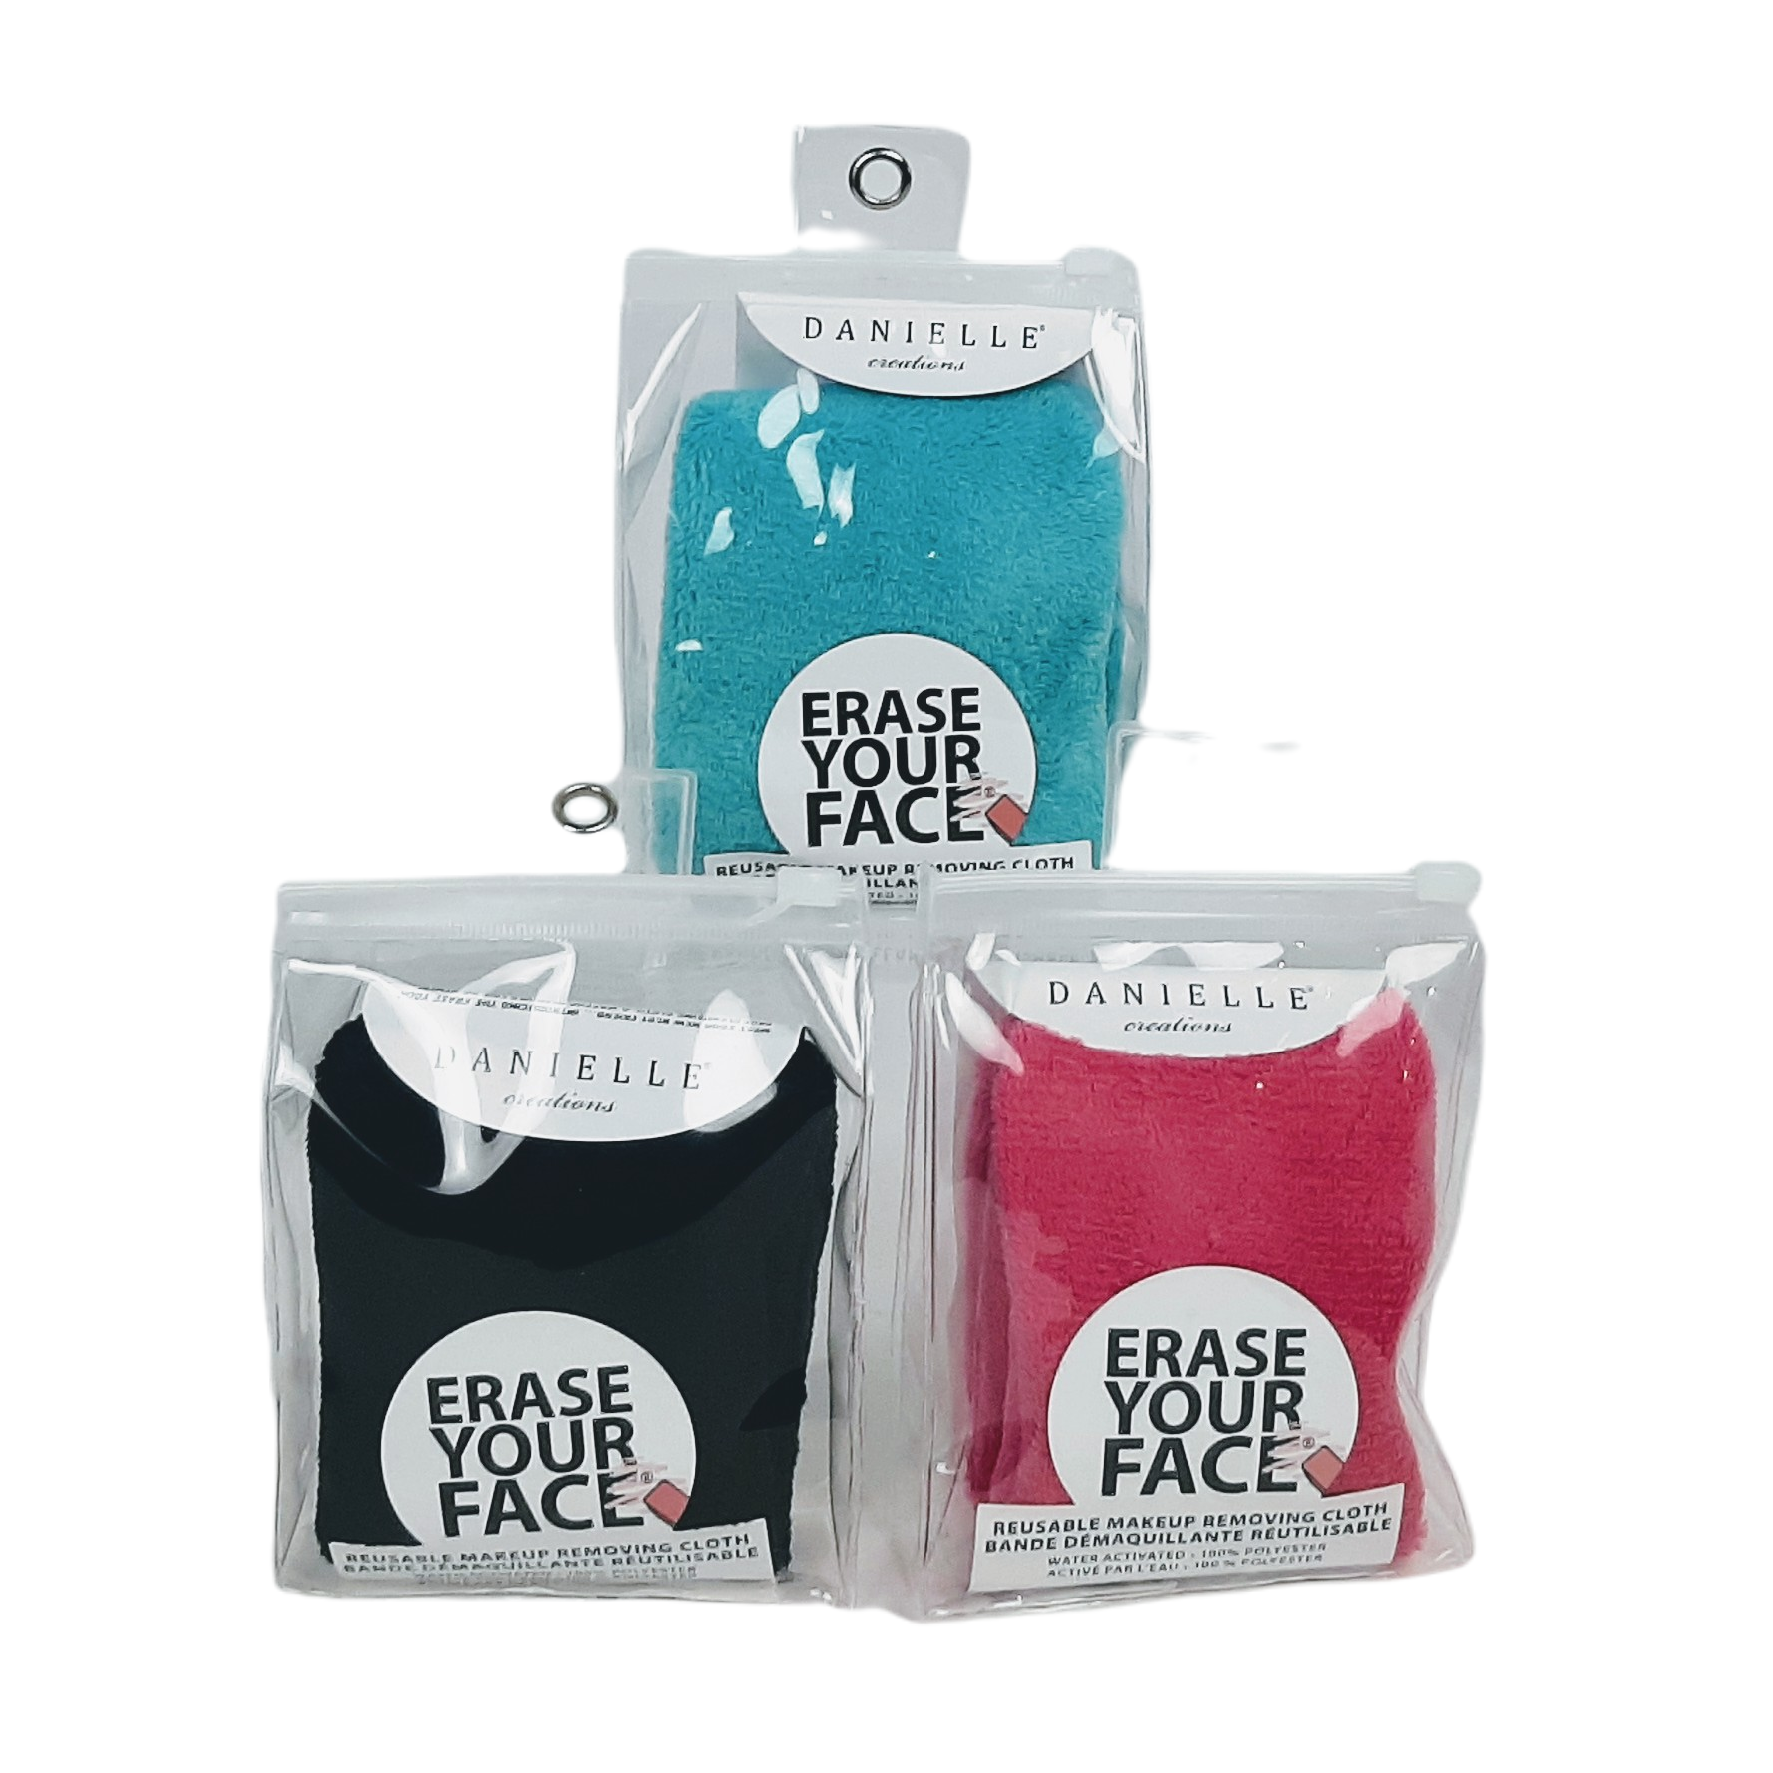 The Erase Your Face cleansing cloth: a make-up remover like no other! This cloth has the ability to remove all types of cosmetics, including waterproof mascara without the use of harmful chemicals or synthetic make-up removers. Just add water!  Available in Pink, Blue or Black